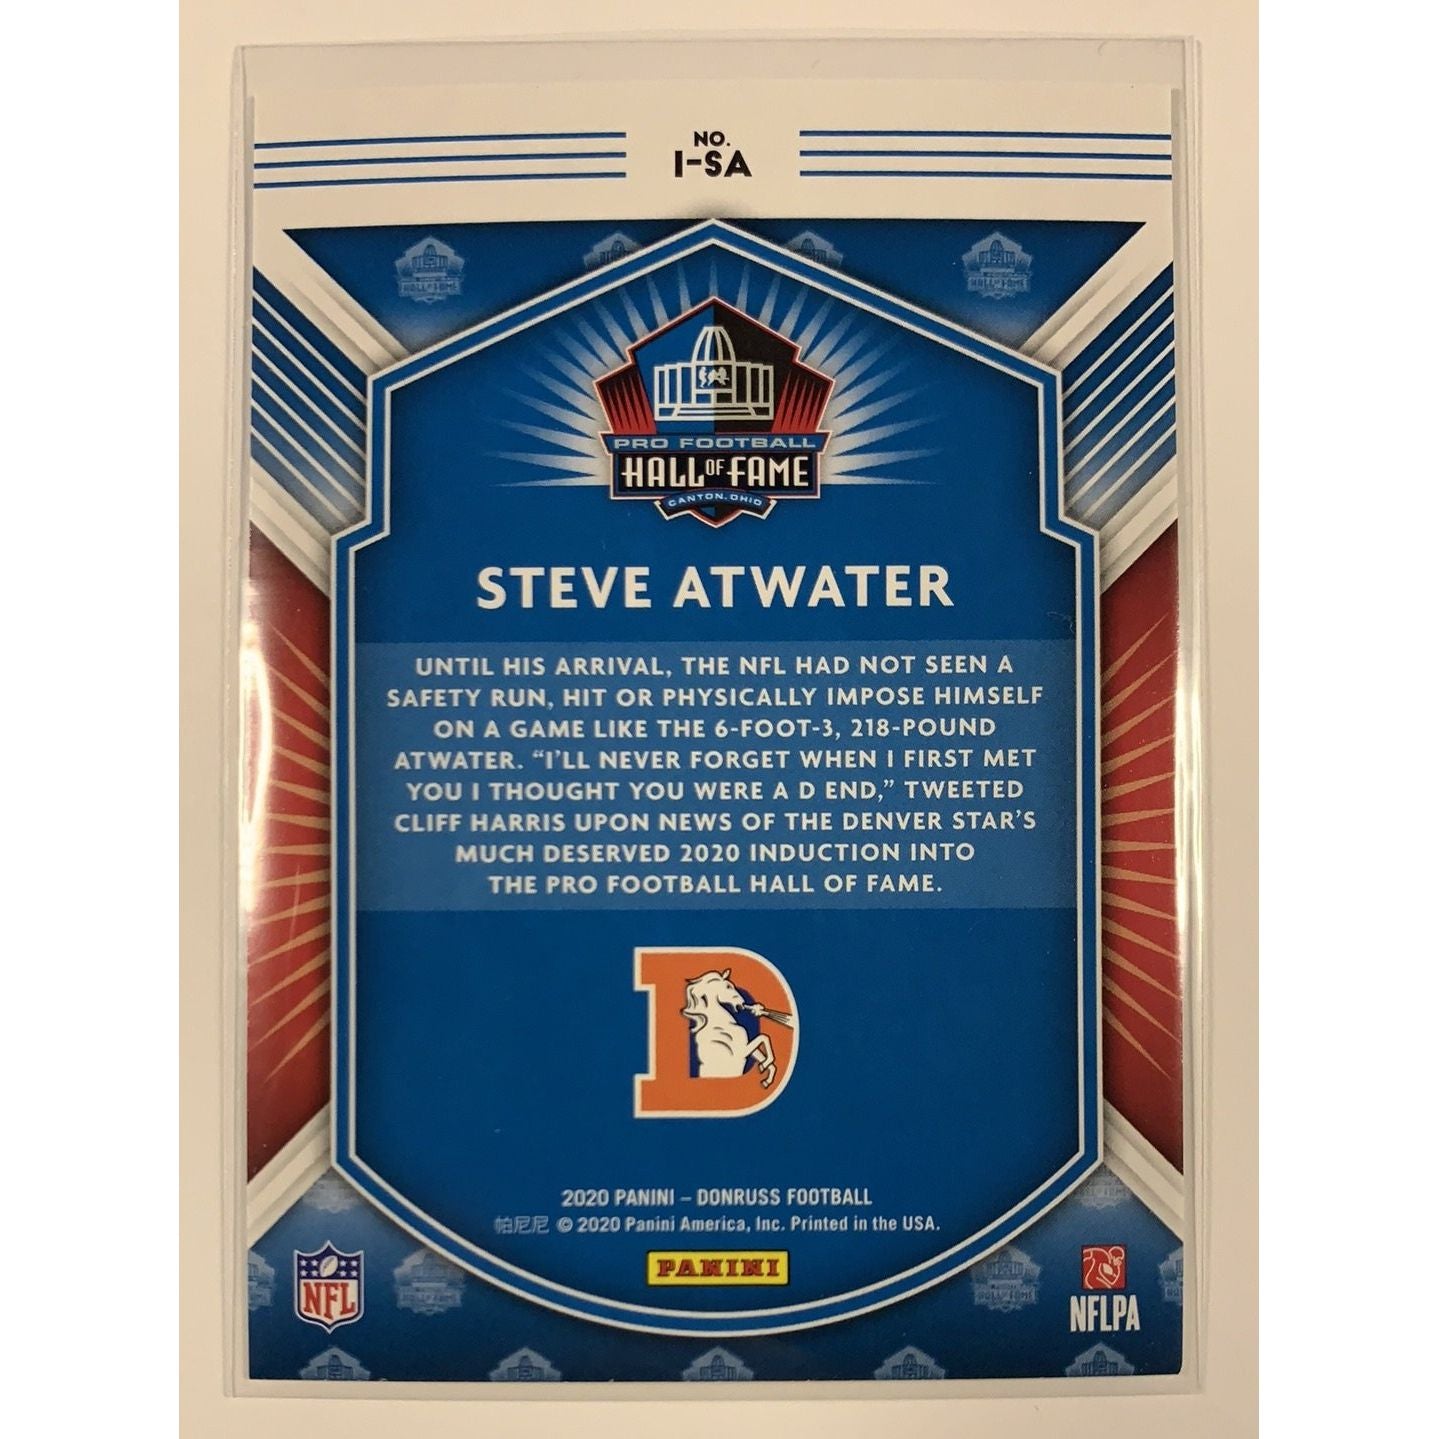  2020 Donruss Steve Atwater Inducted  Local Legends Cards & Collectibles